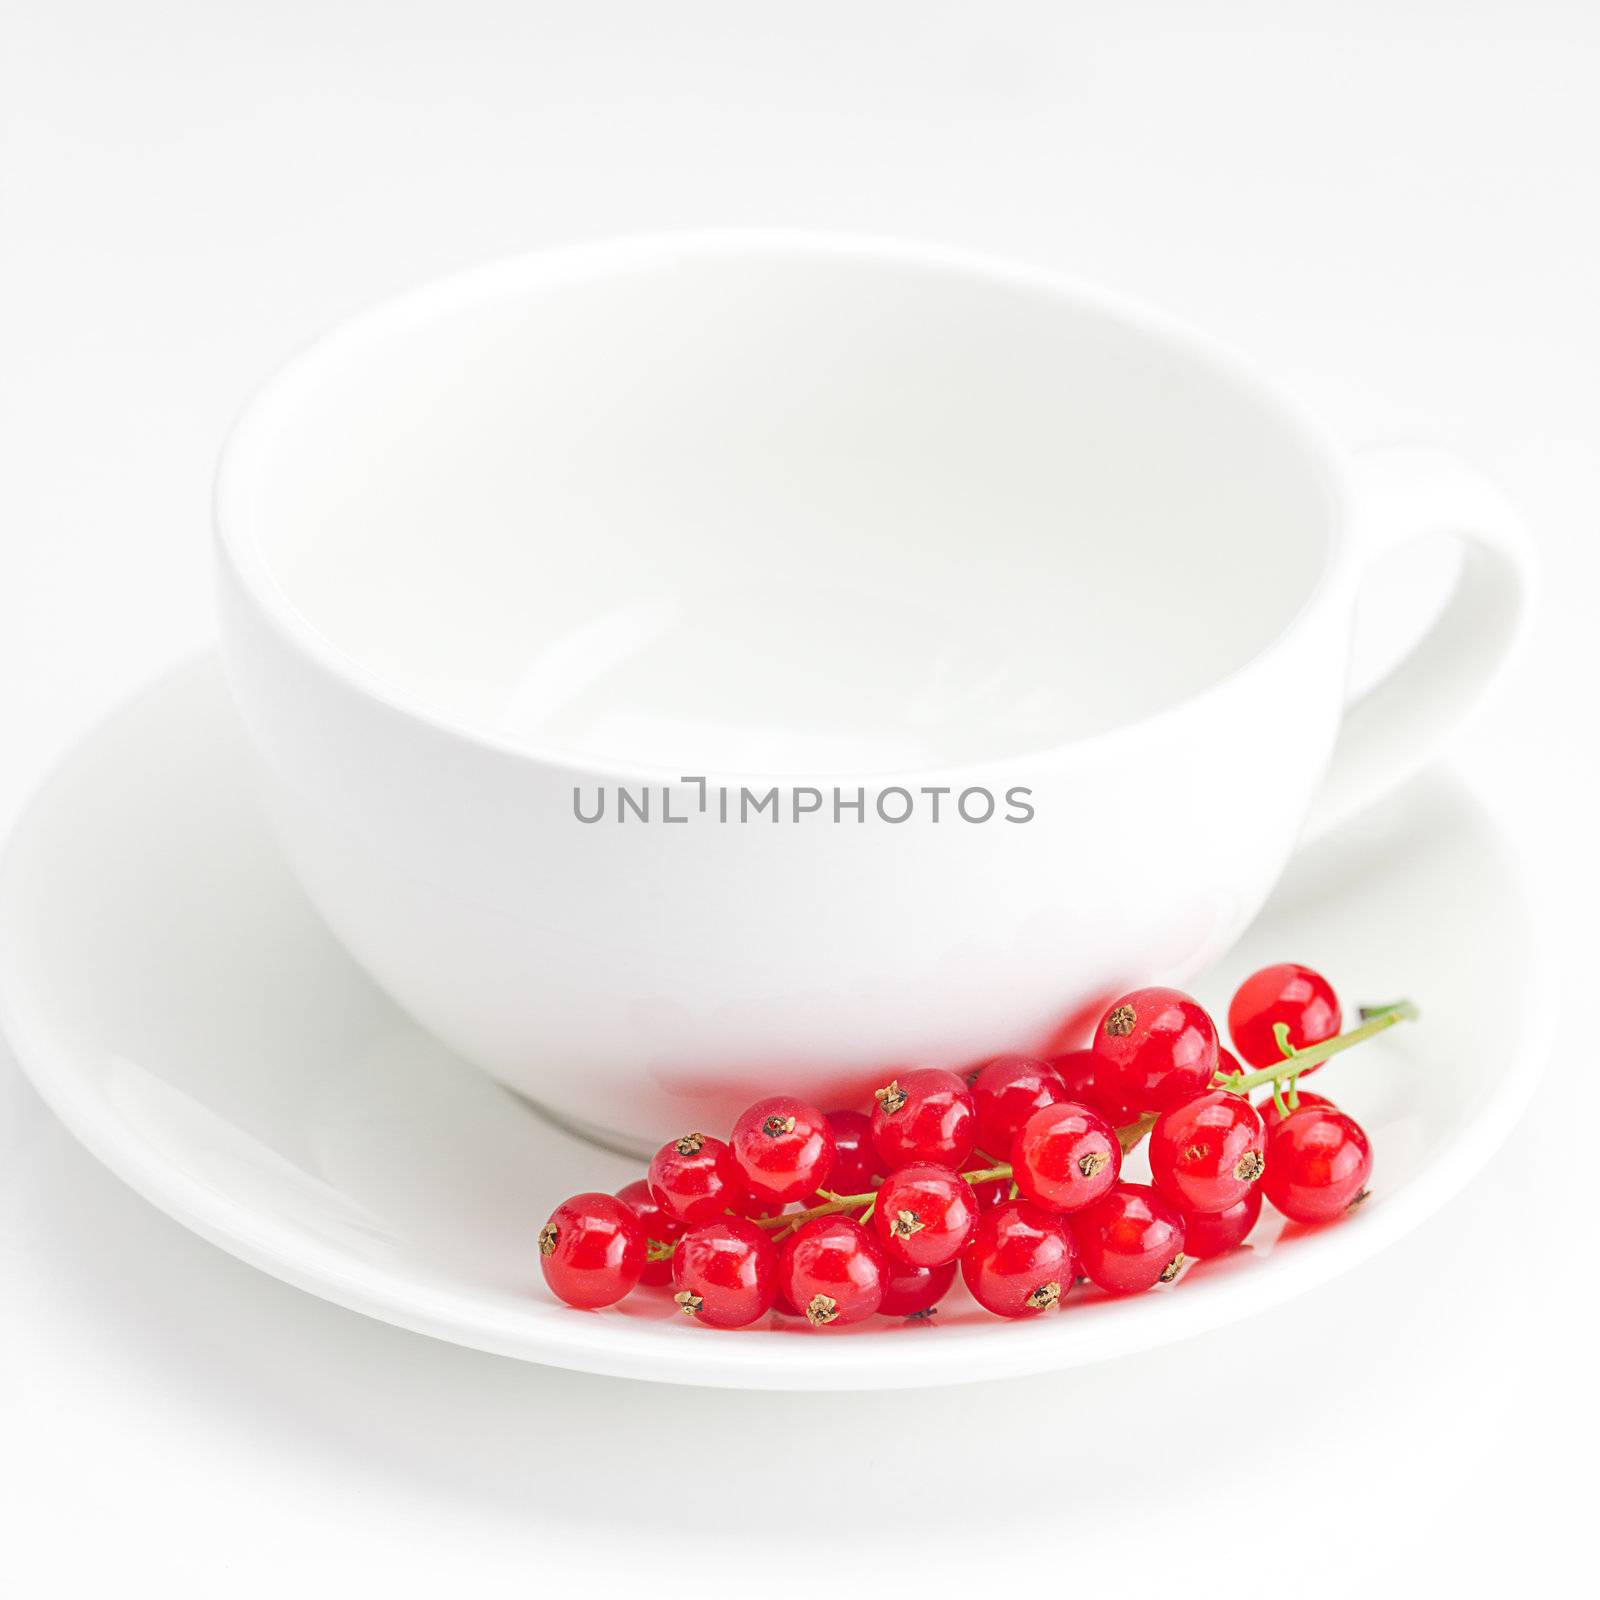 branch of red currants and a cup with a plate isolated on white